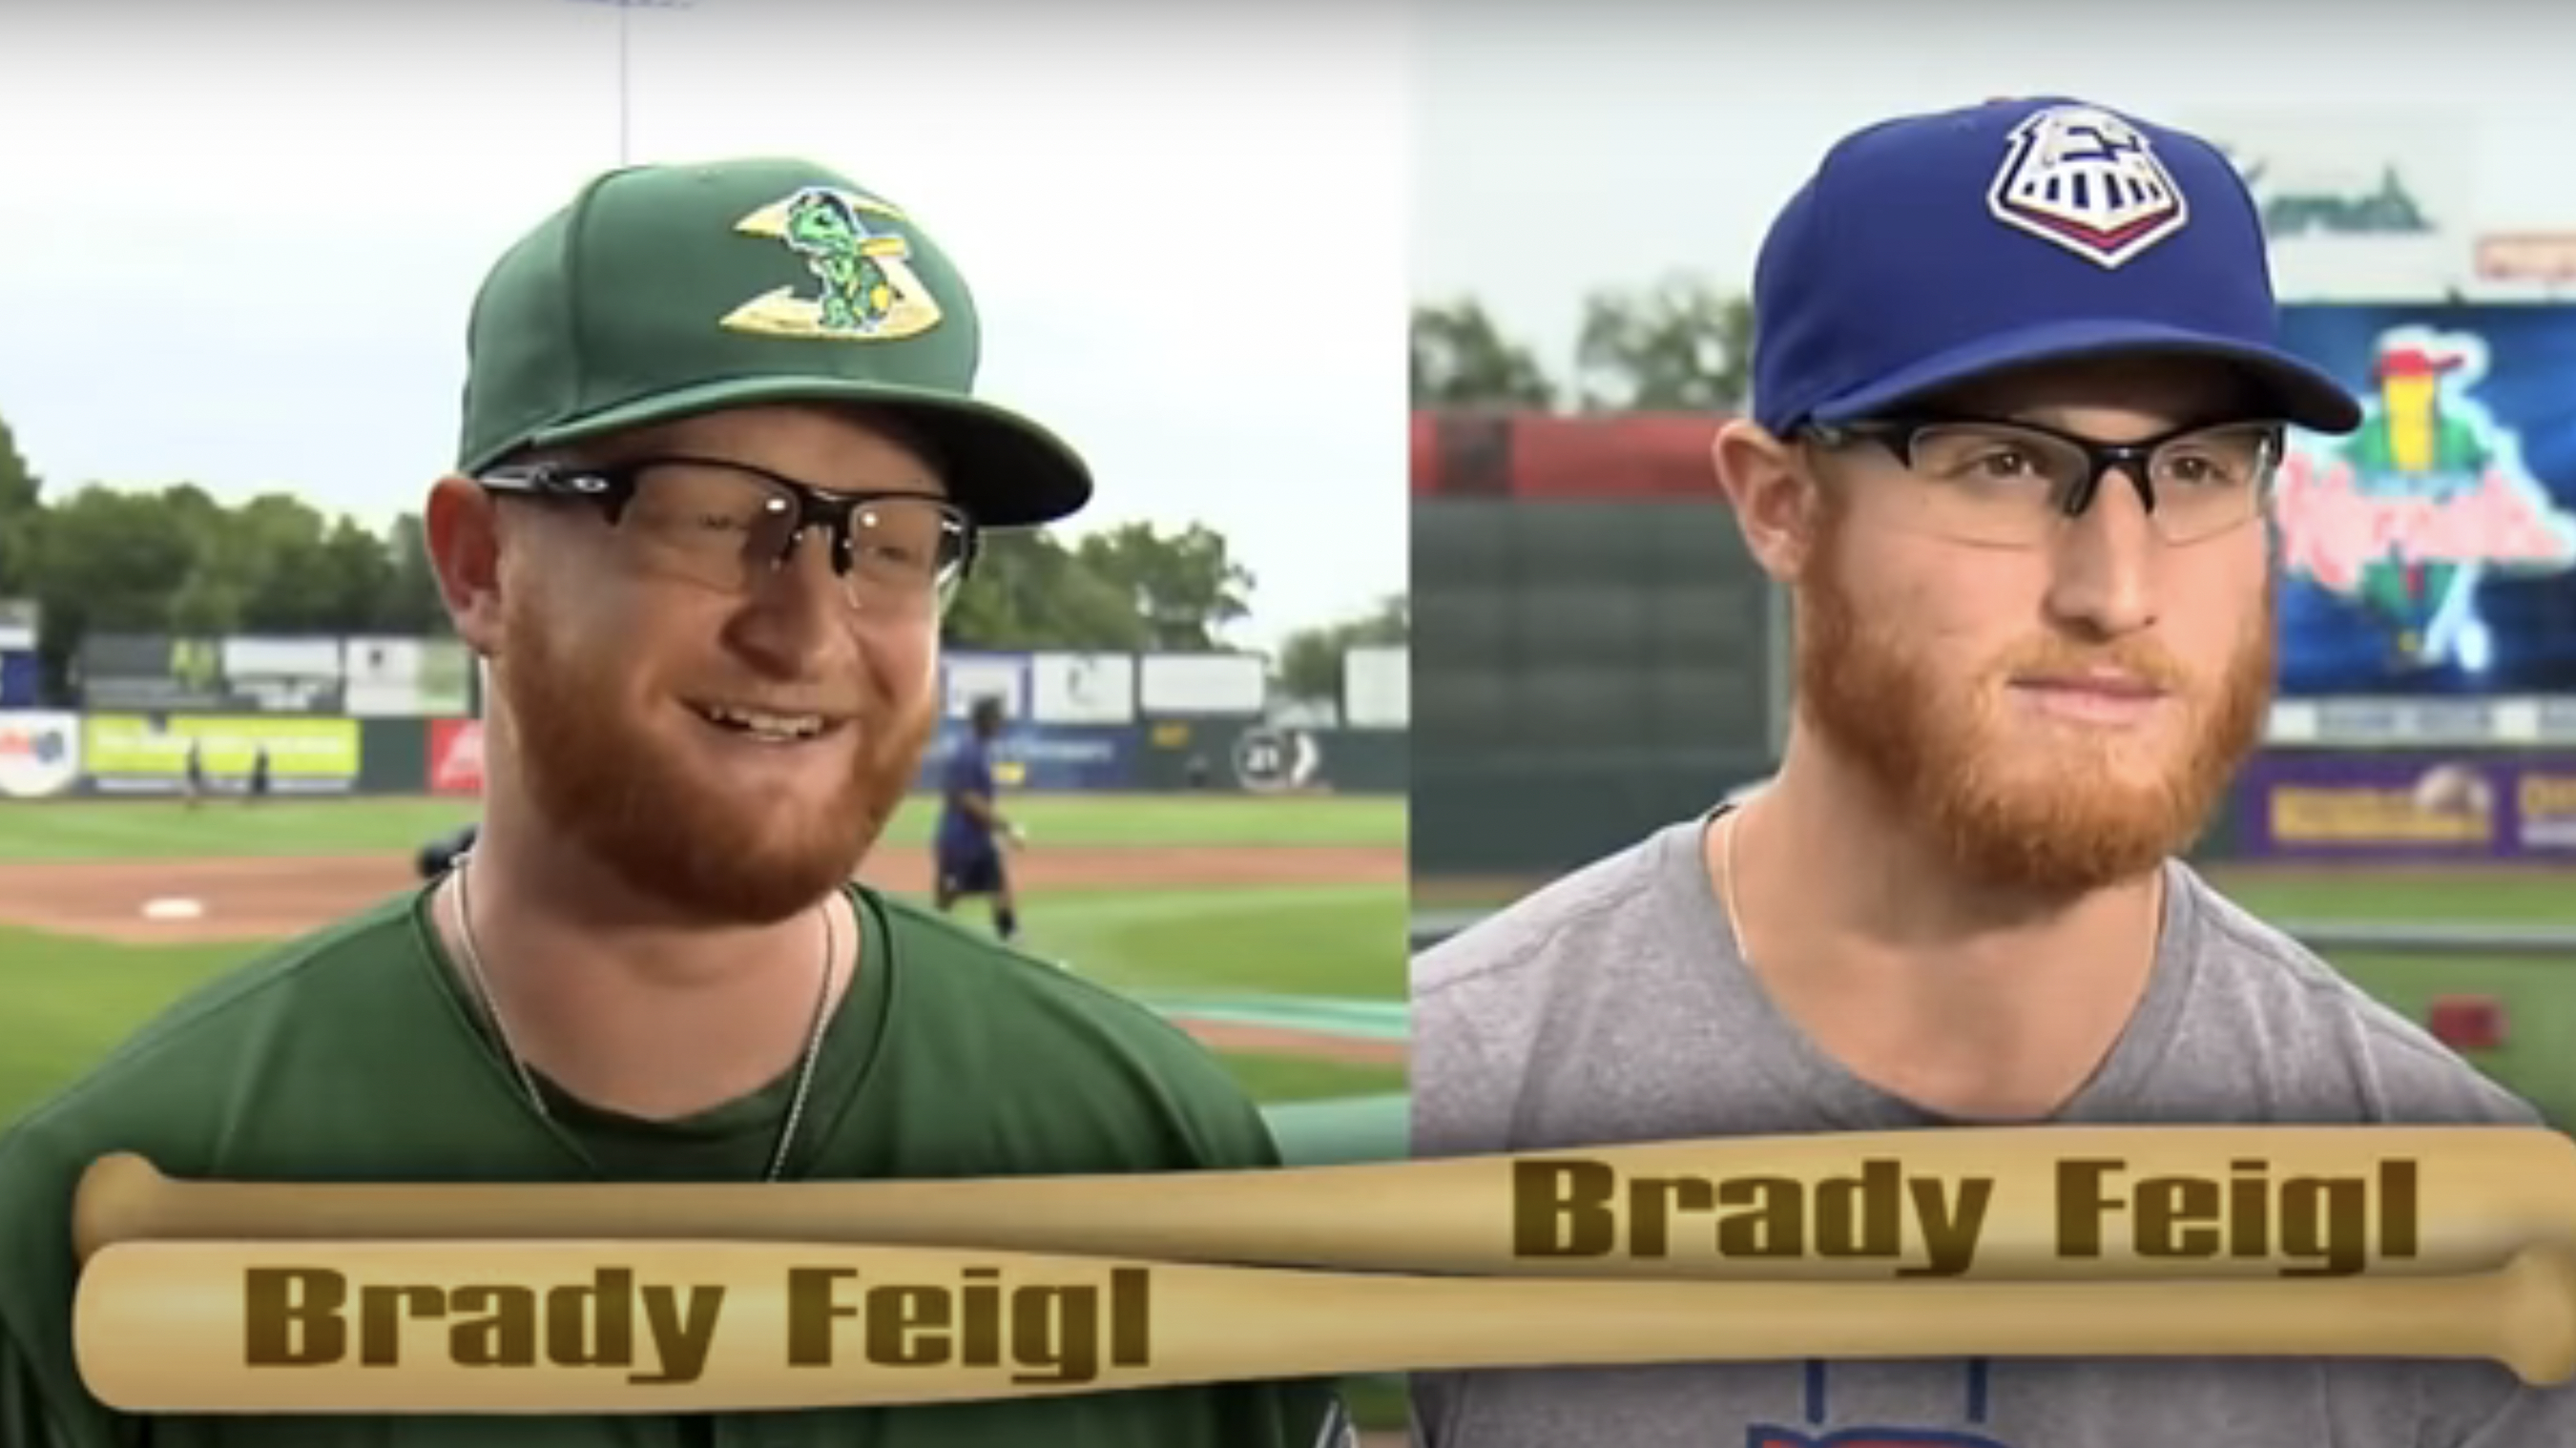 two identical-looking baseball players share the same name